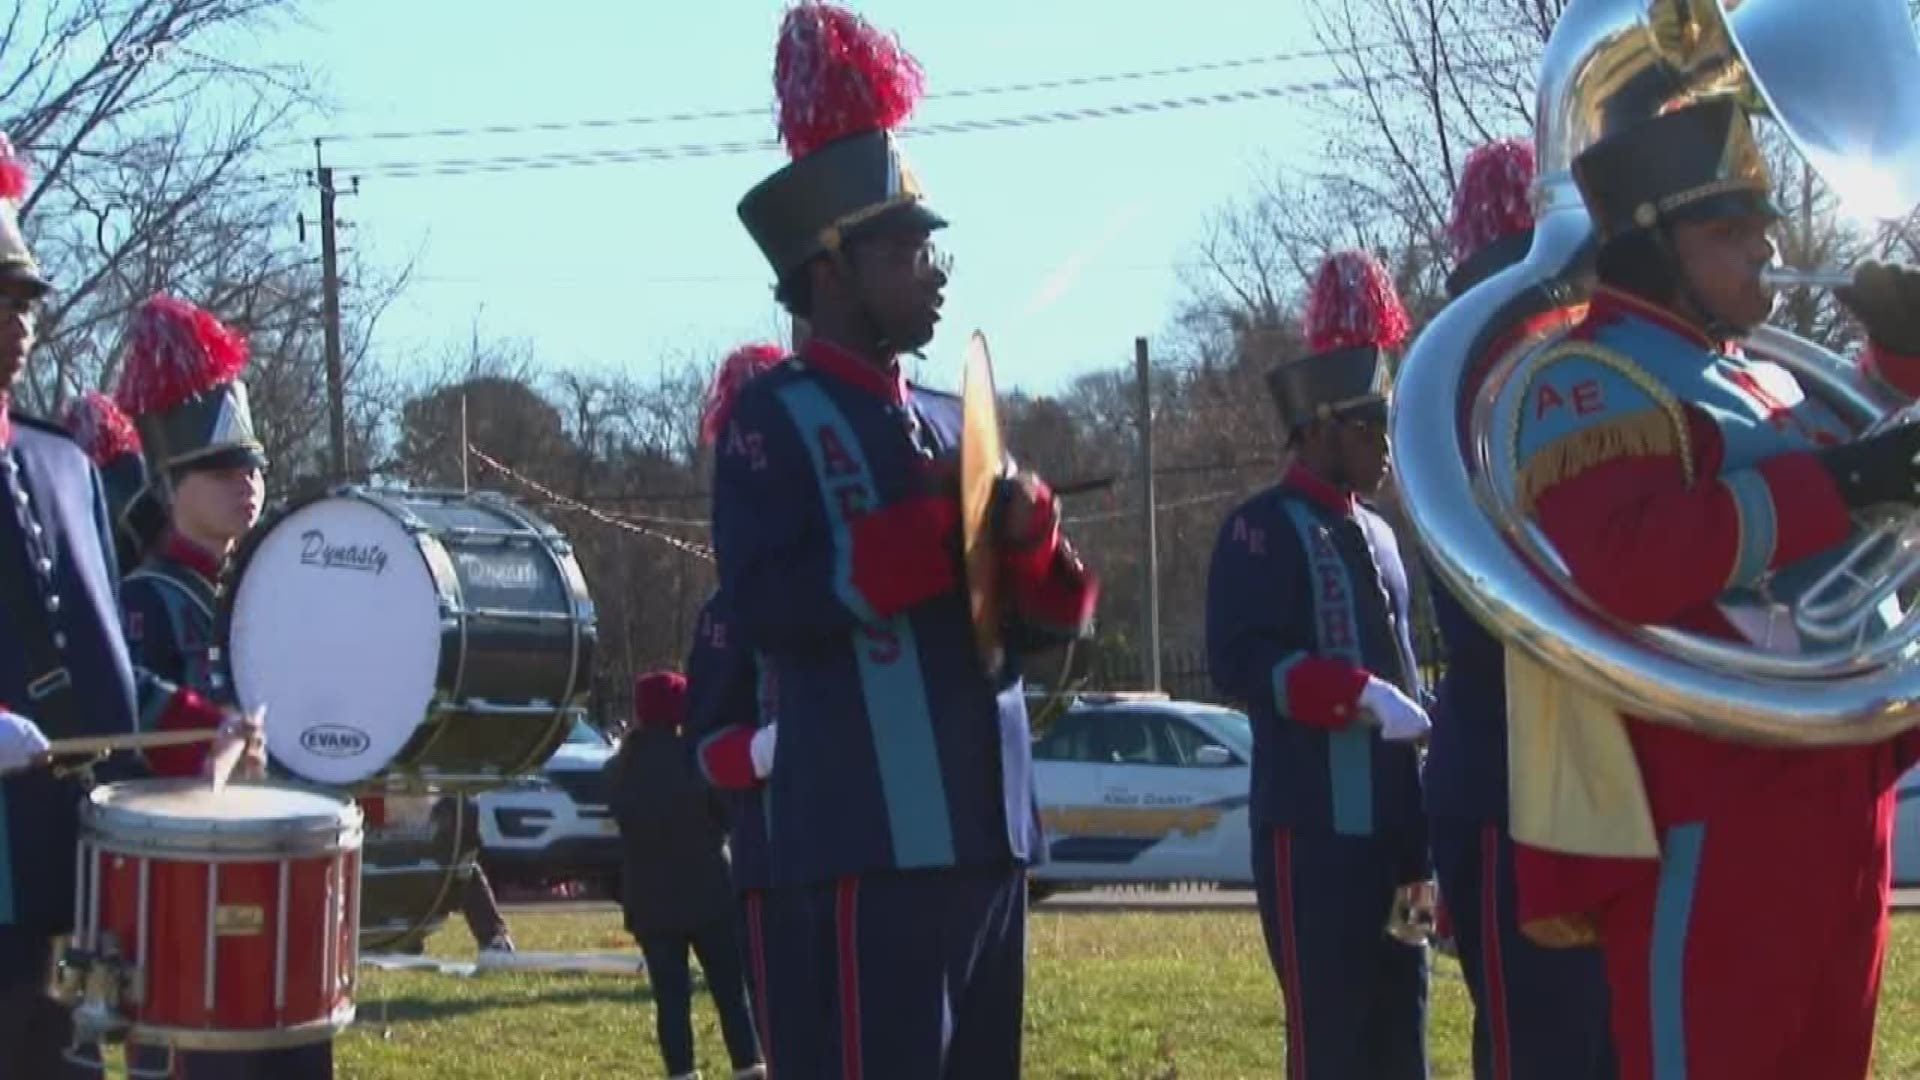 A parade and memorial service honored the life and legacy of civil rights leader Dr. Martin Luther King Jr.